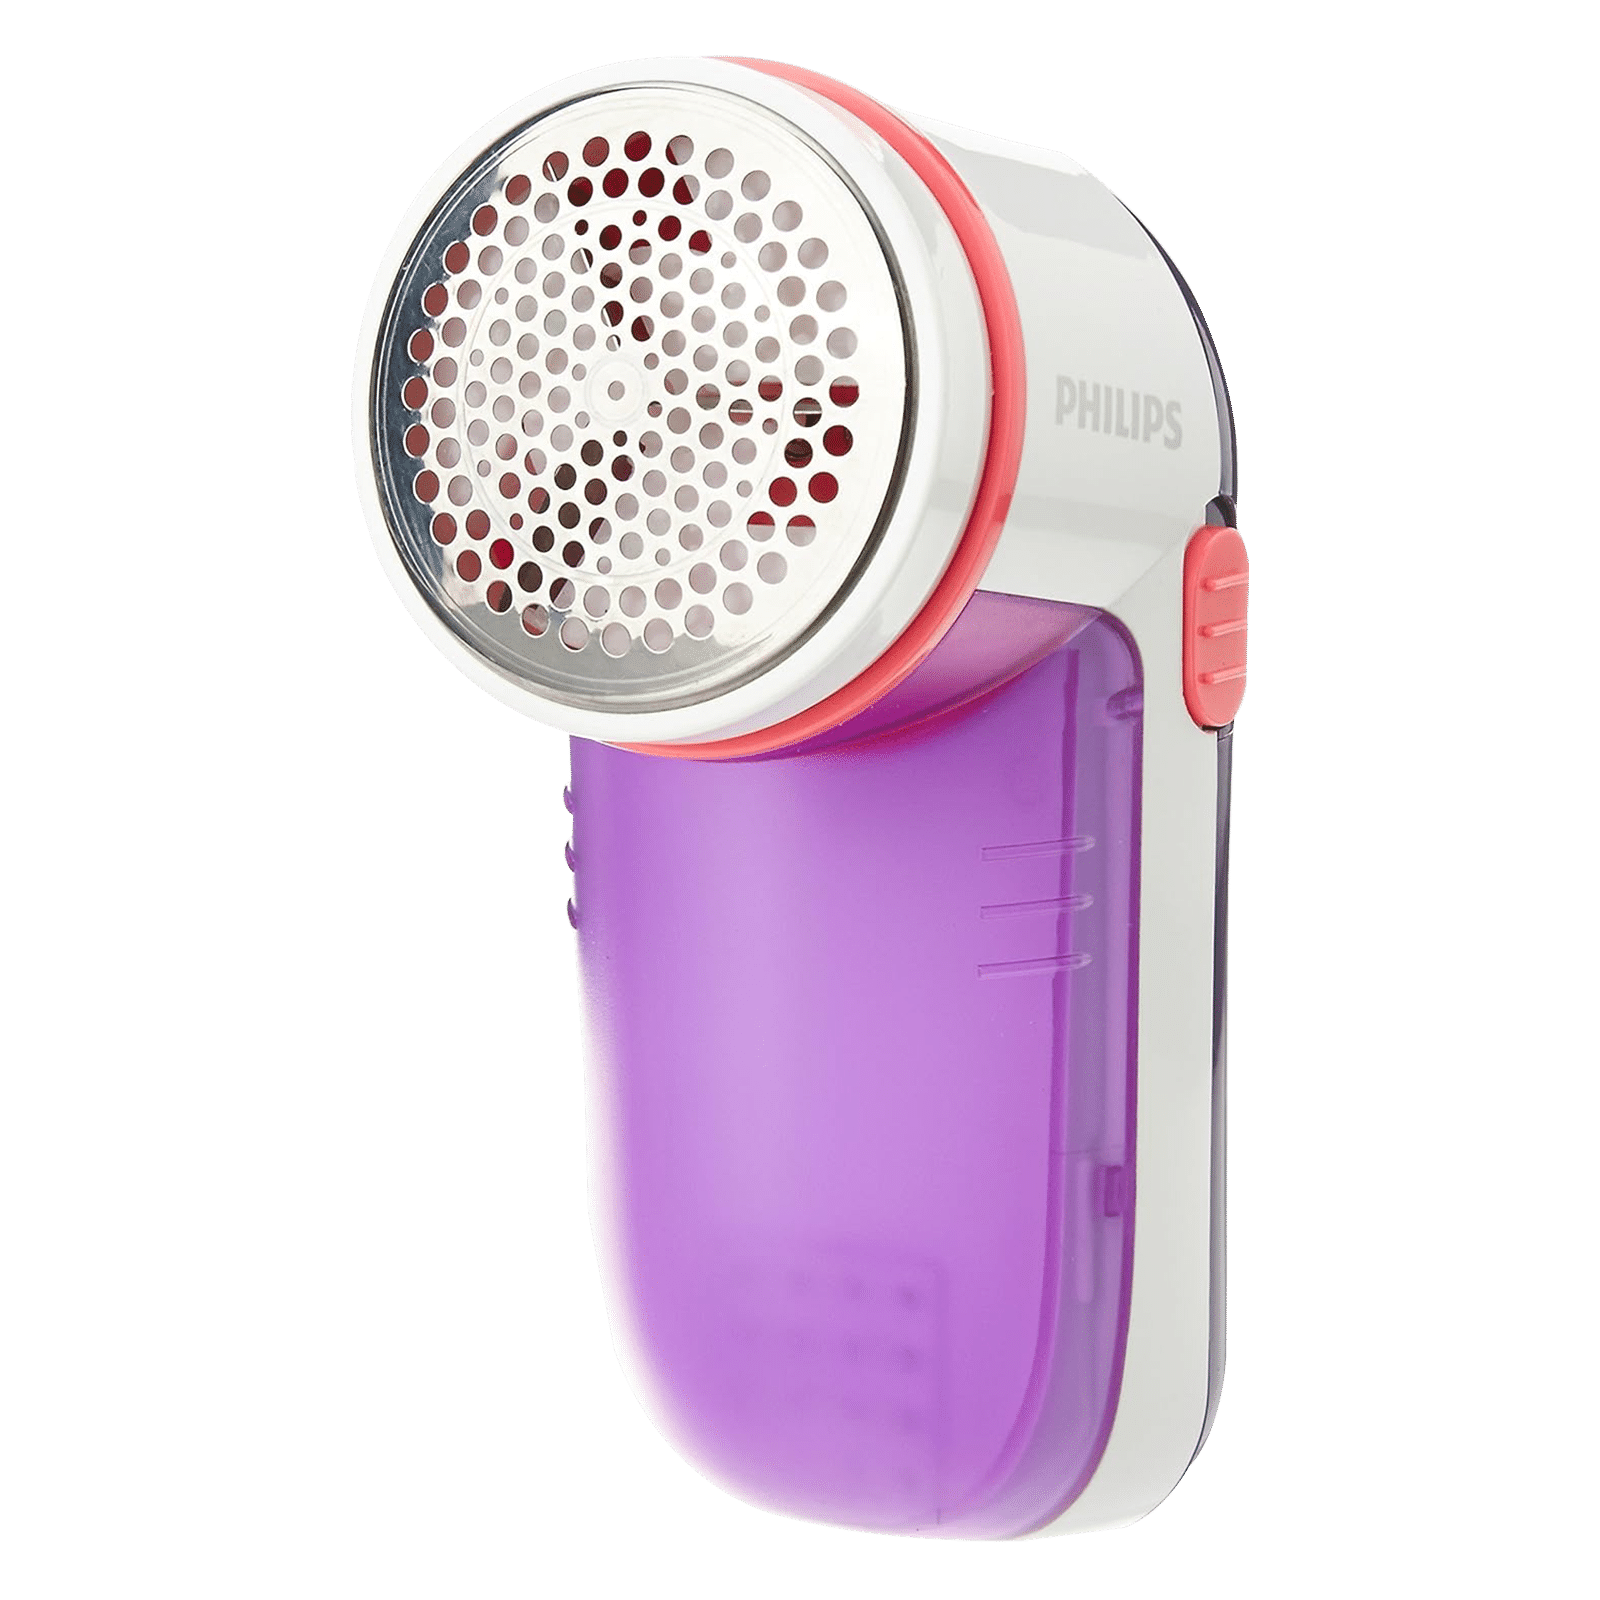 Buy Philips Fabric Shaver (GC026, Pink) Online - Croma